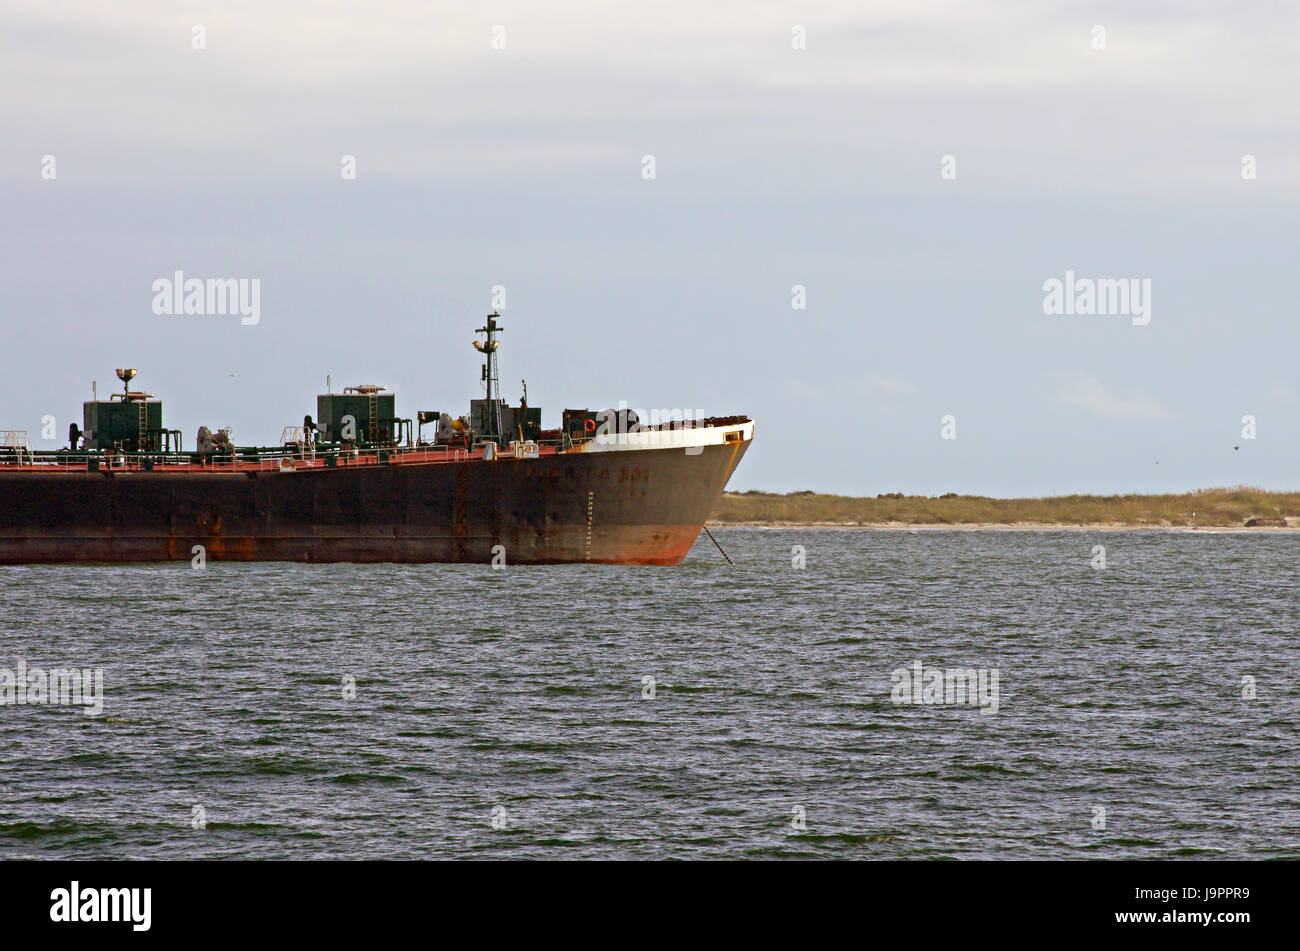 Shipping Vessel Anchored off the Coast of Alabama in the Gulf of Mexico Stock Photo